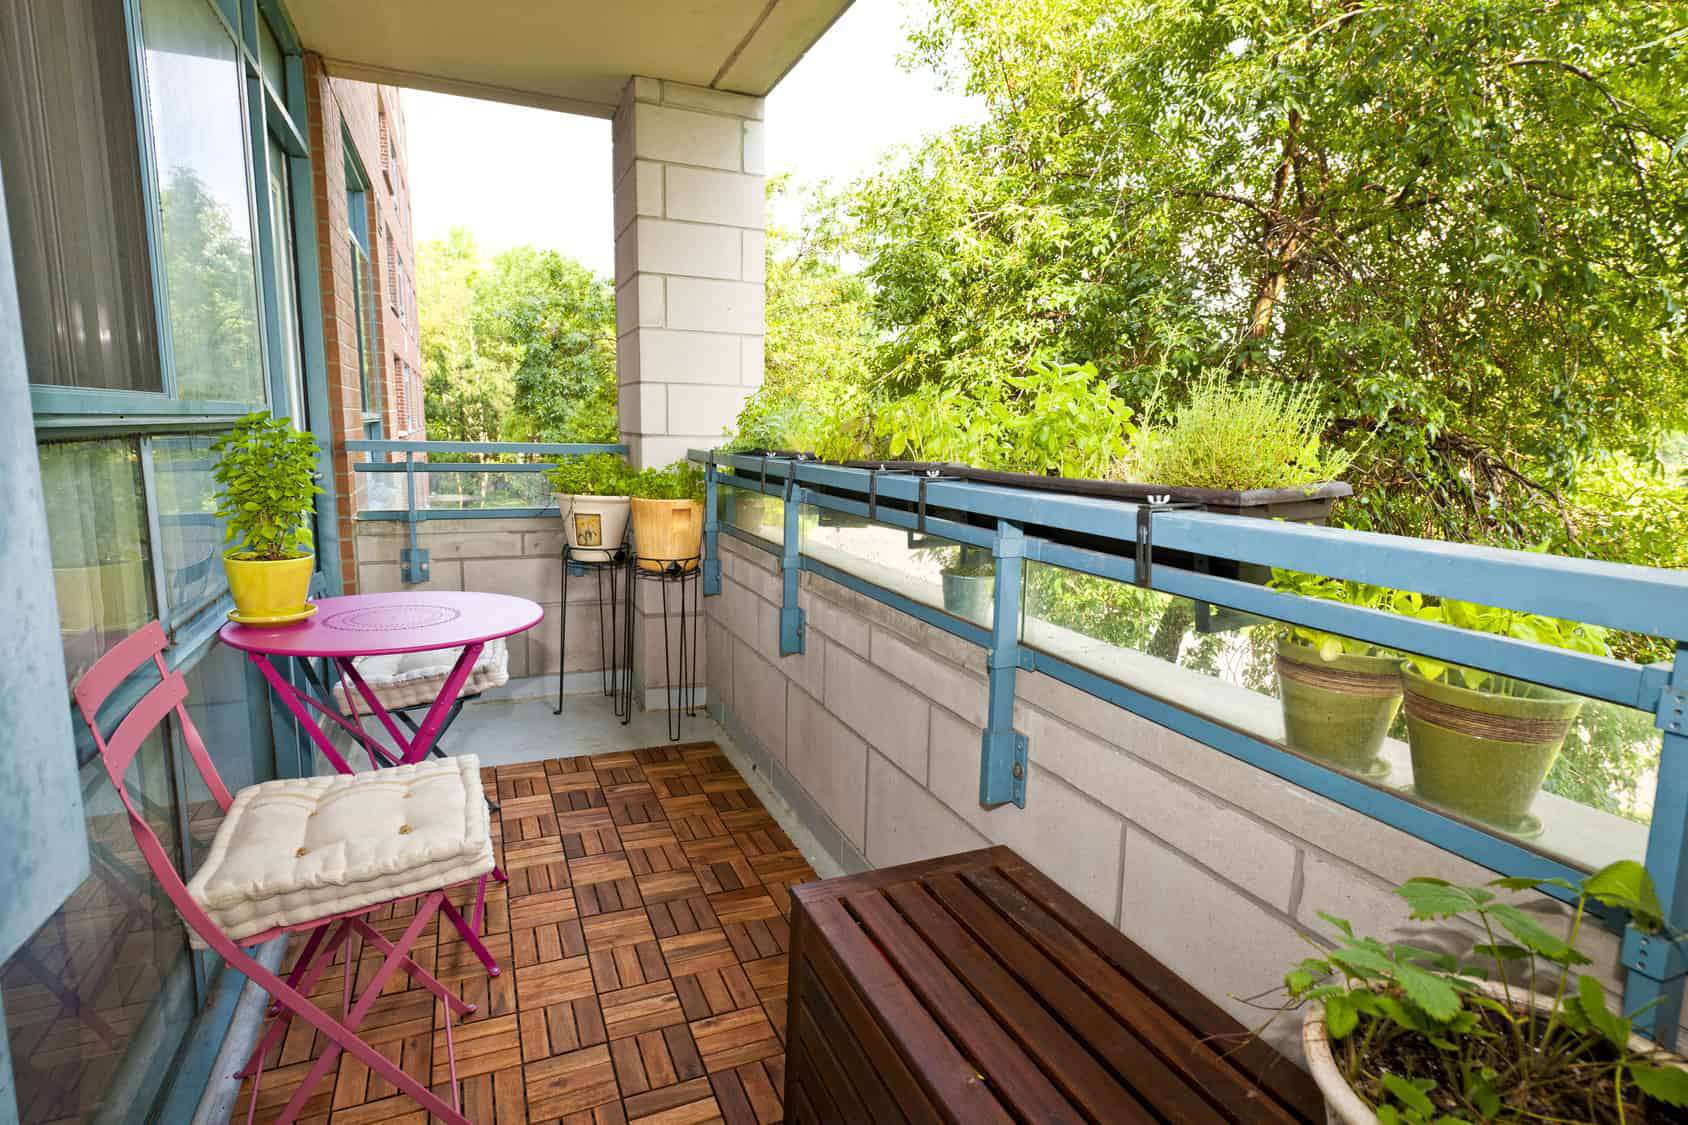 5 Easy Ways to Get the Most Out of Your Balcony Space